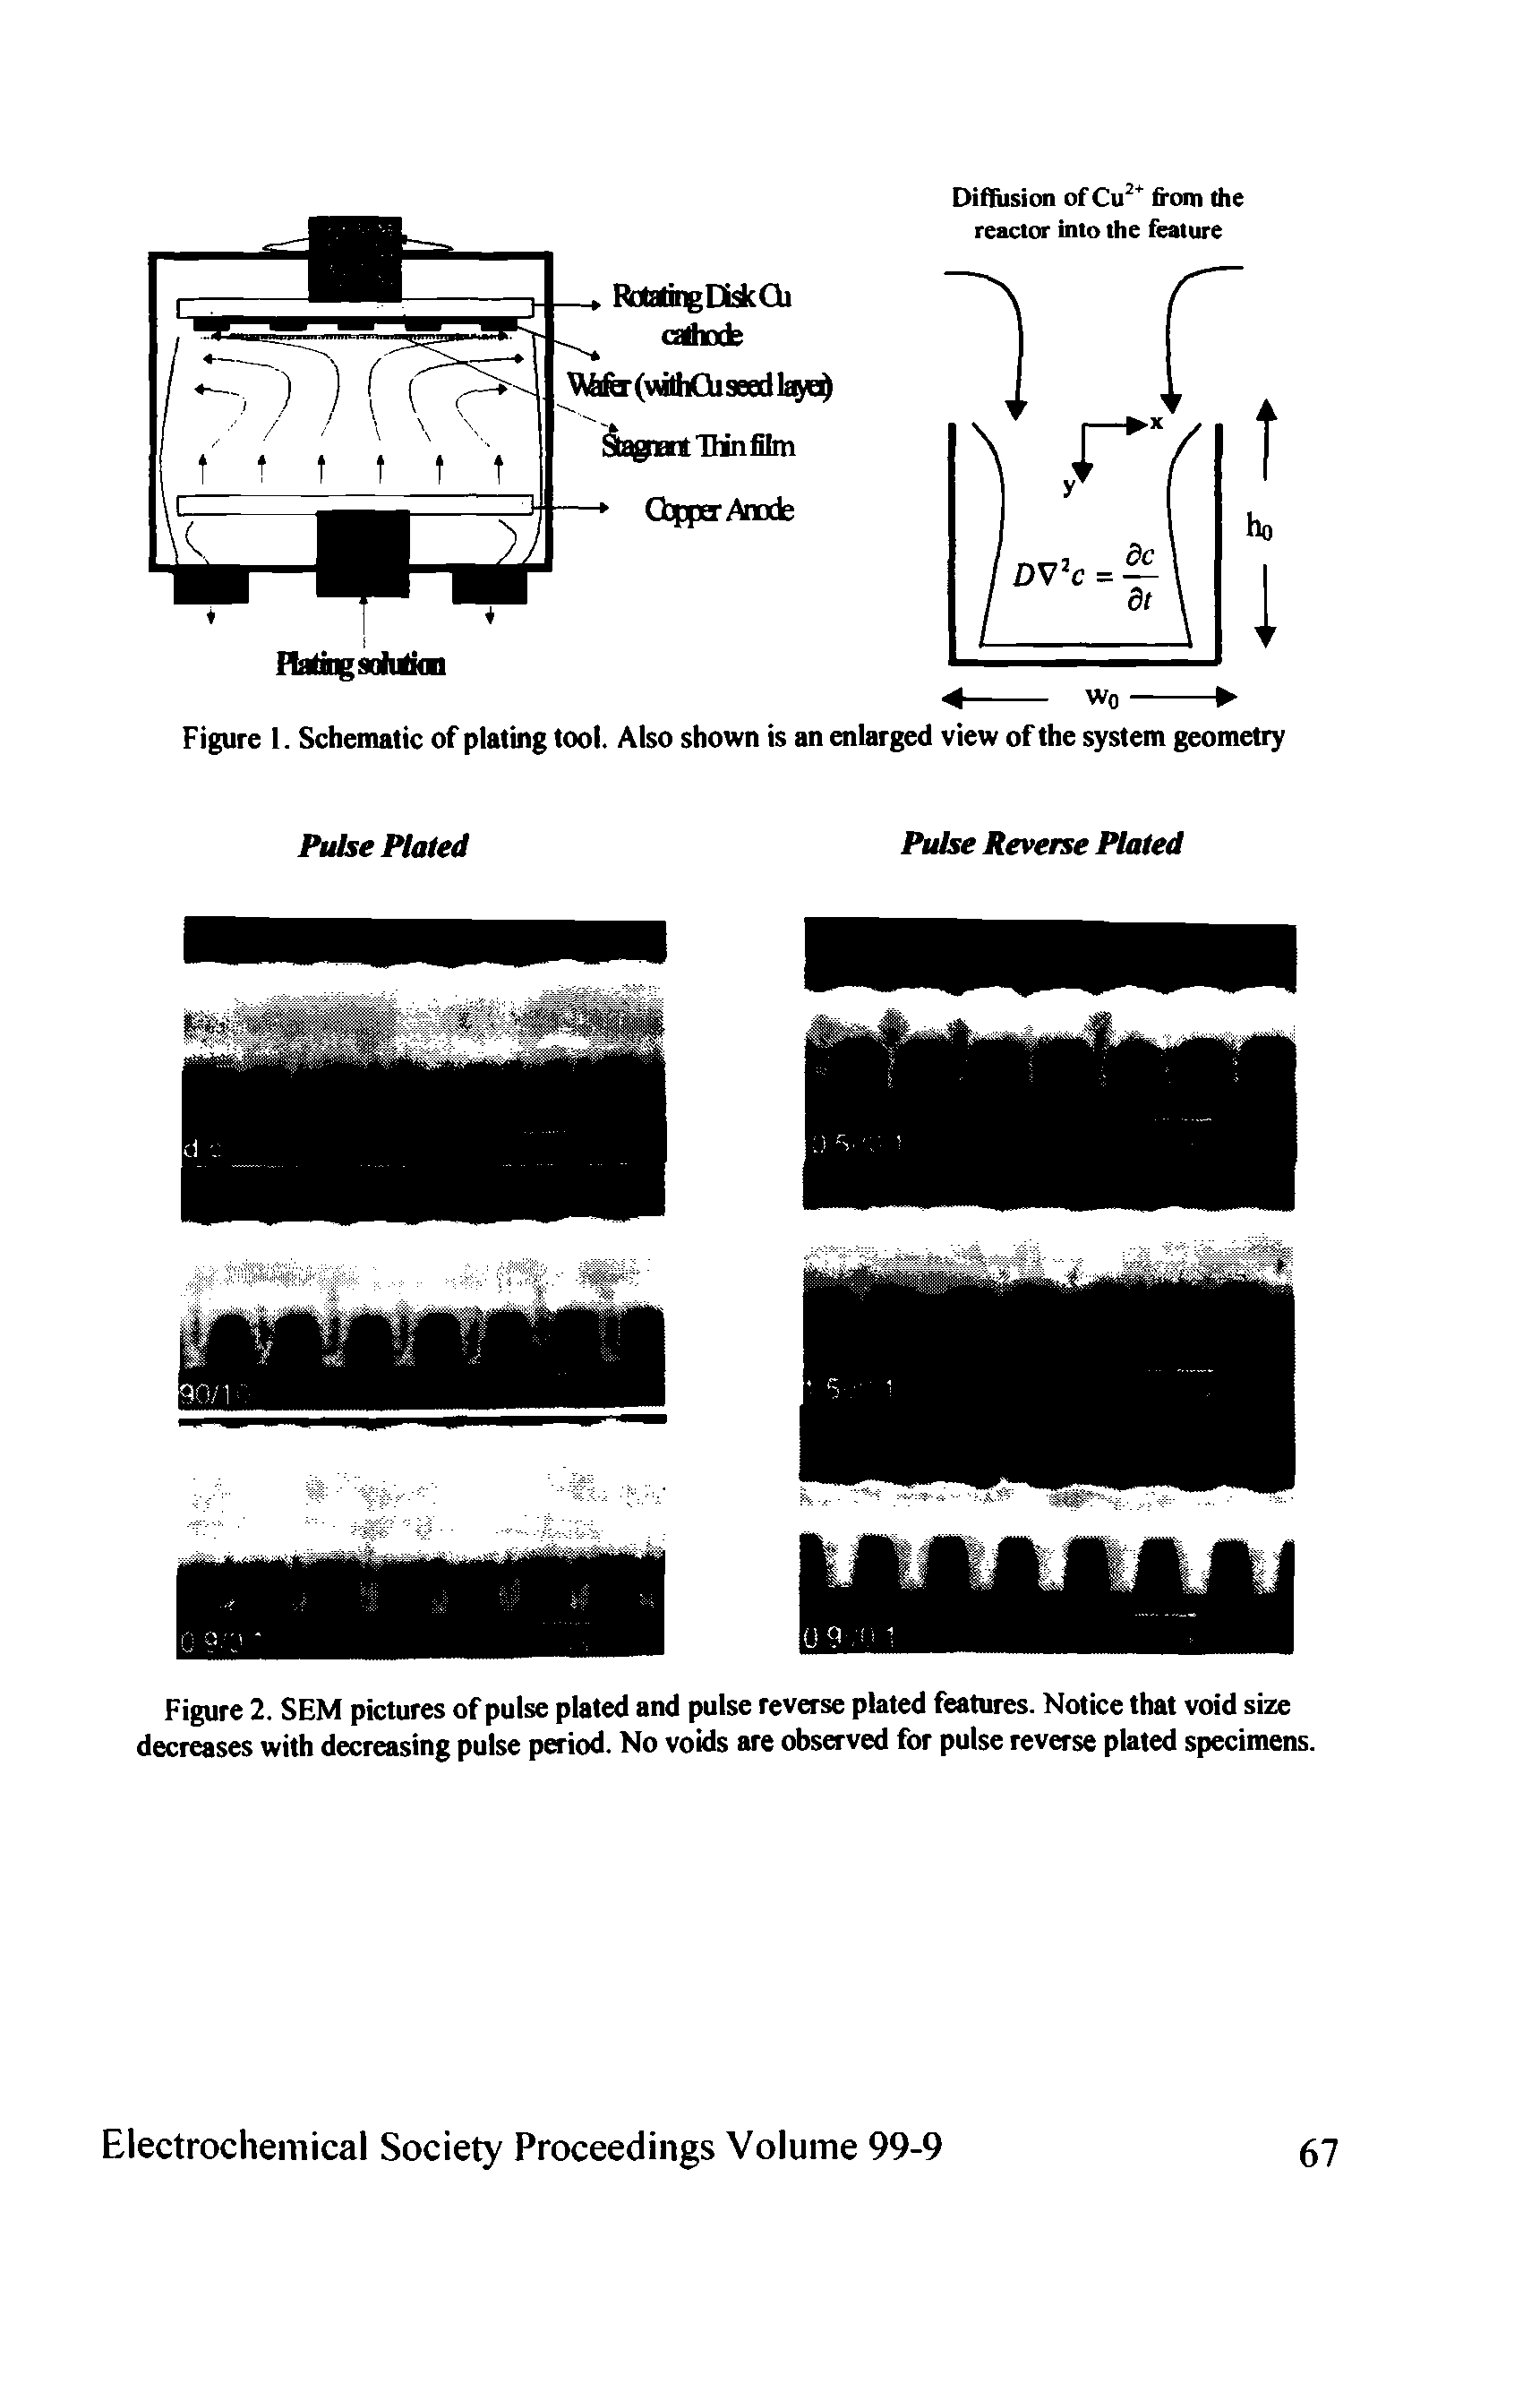 Figure 2. SEM pictures of pulse plated and pulse reverse plated features. Notice that void size decreases with decreasing pulse period. No voids are observed for pulse reverse plated specimens.